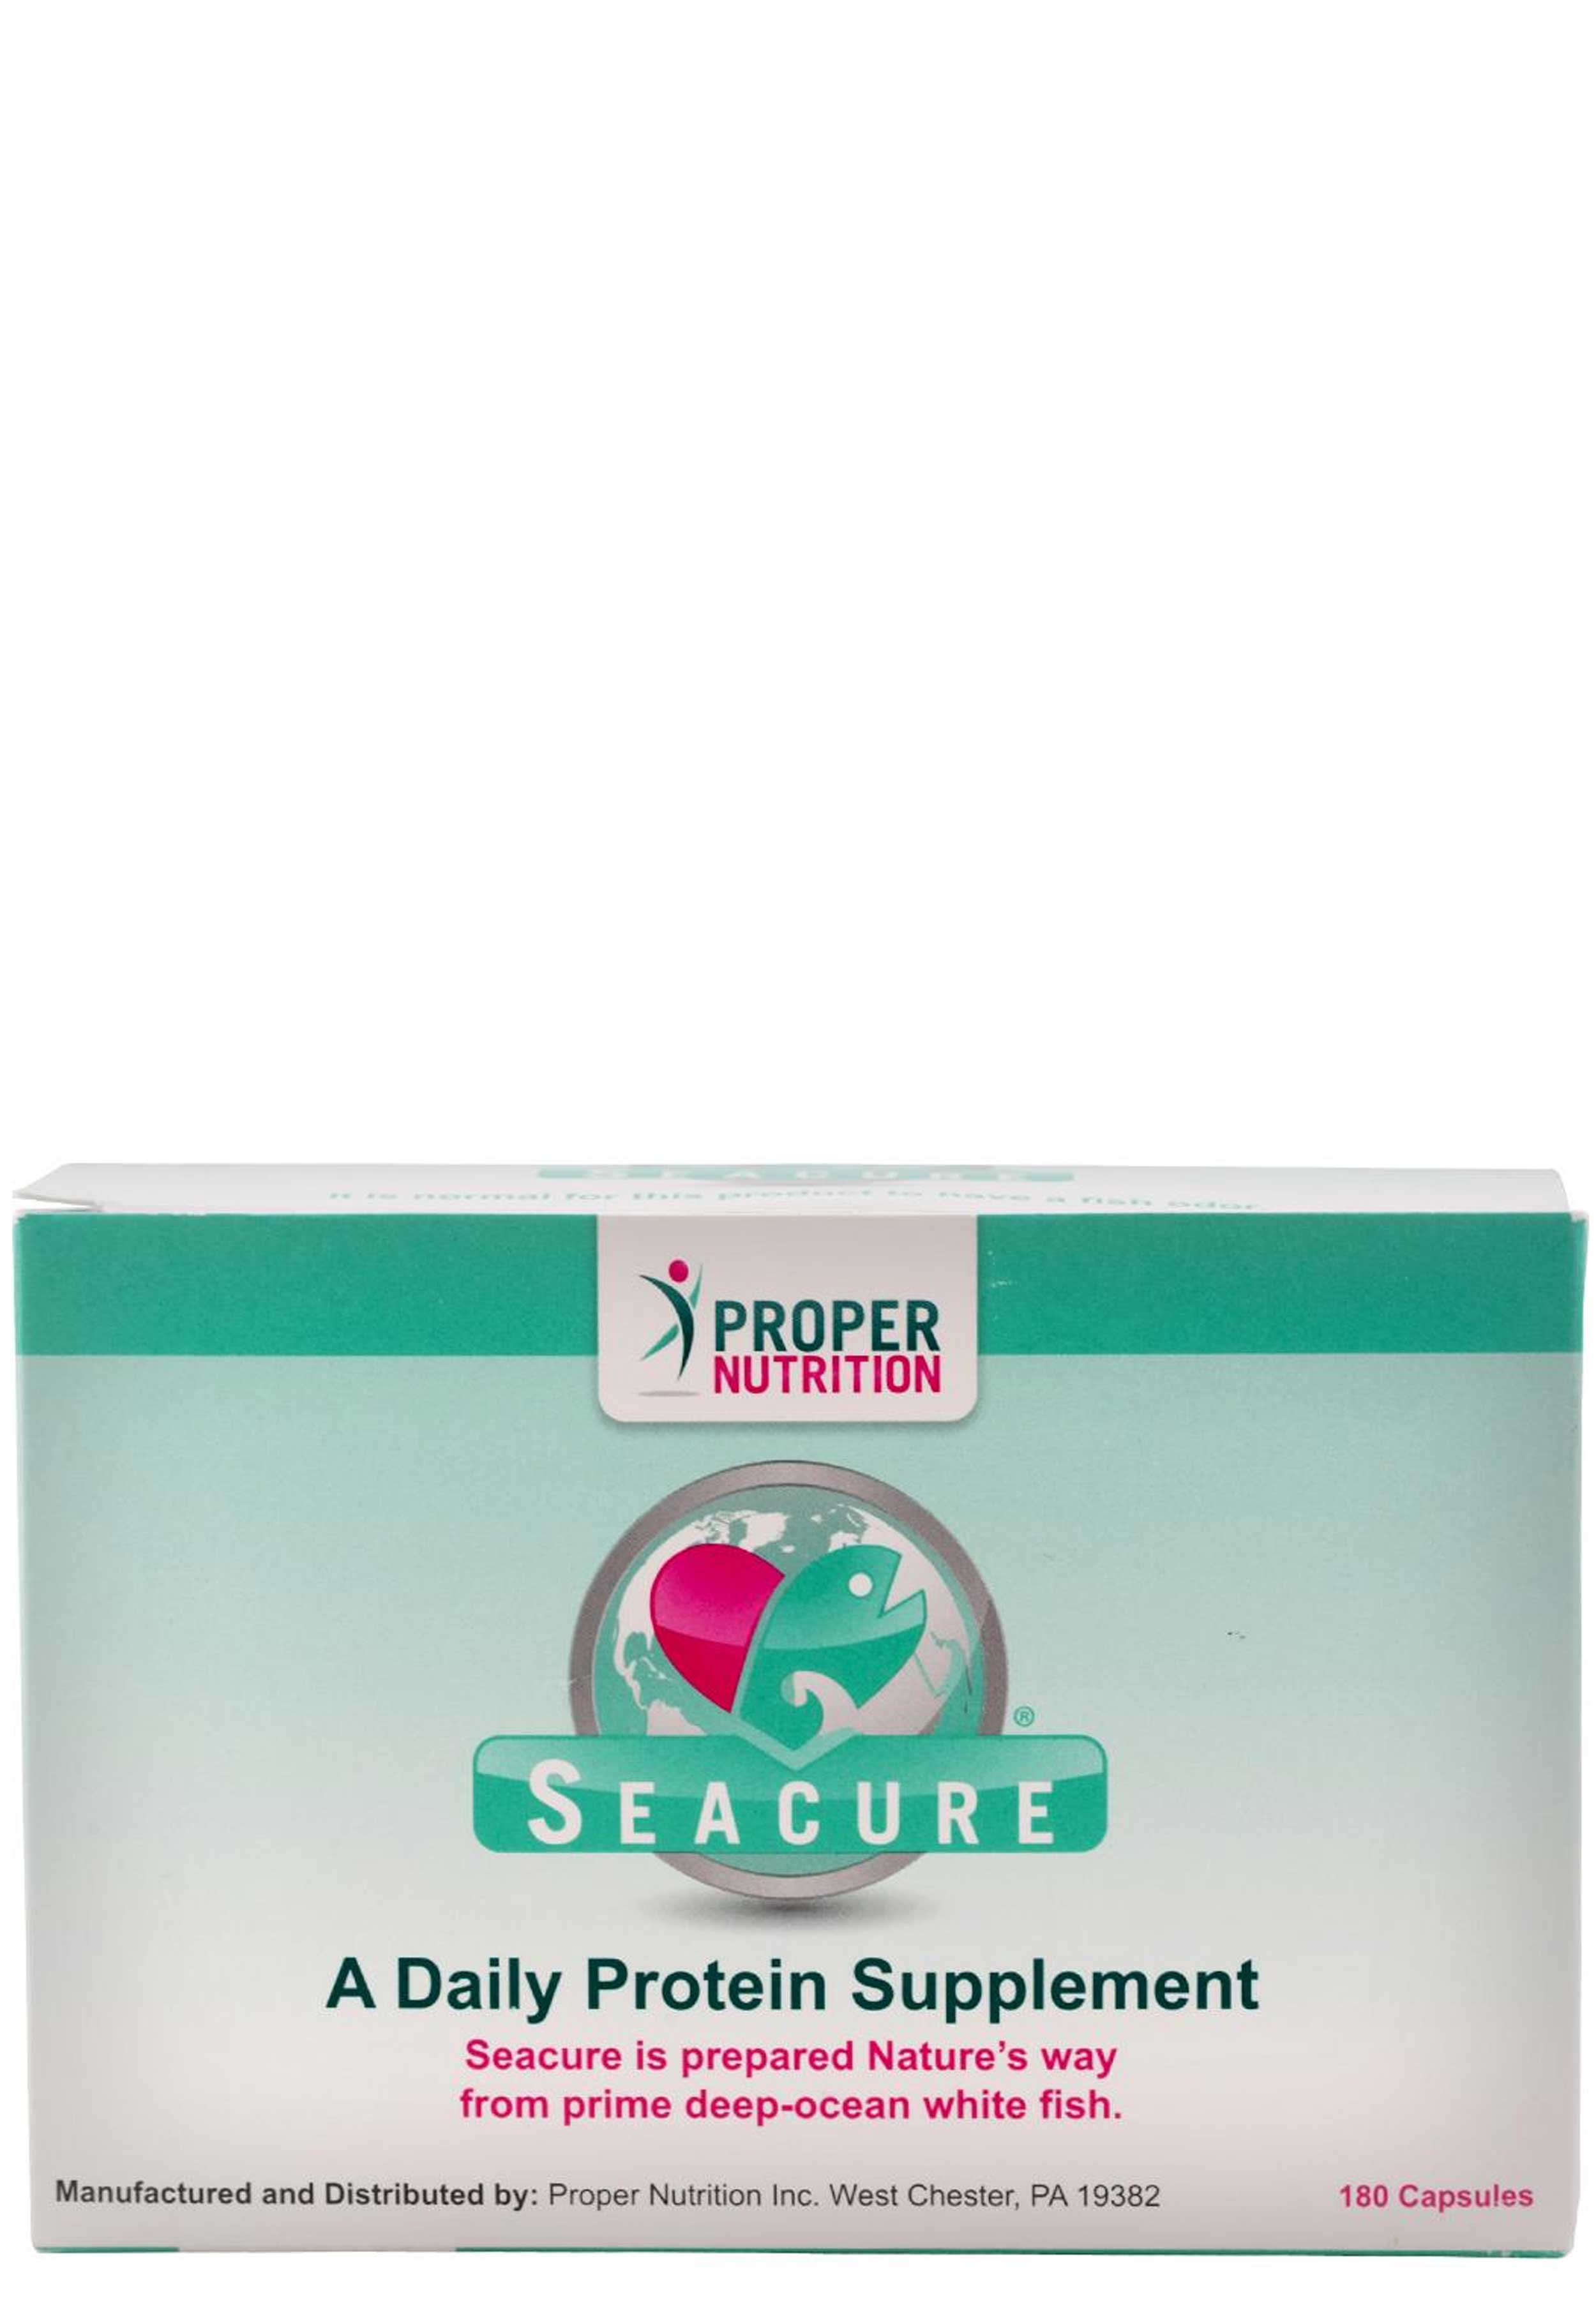 Proper Nutrition Seacure Hydrolyzed White Fish Blister Packs (Capsules)